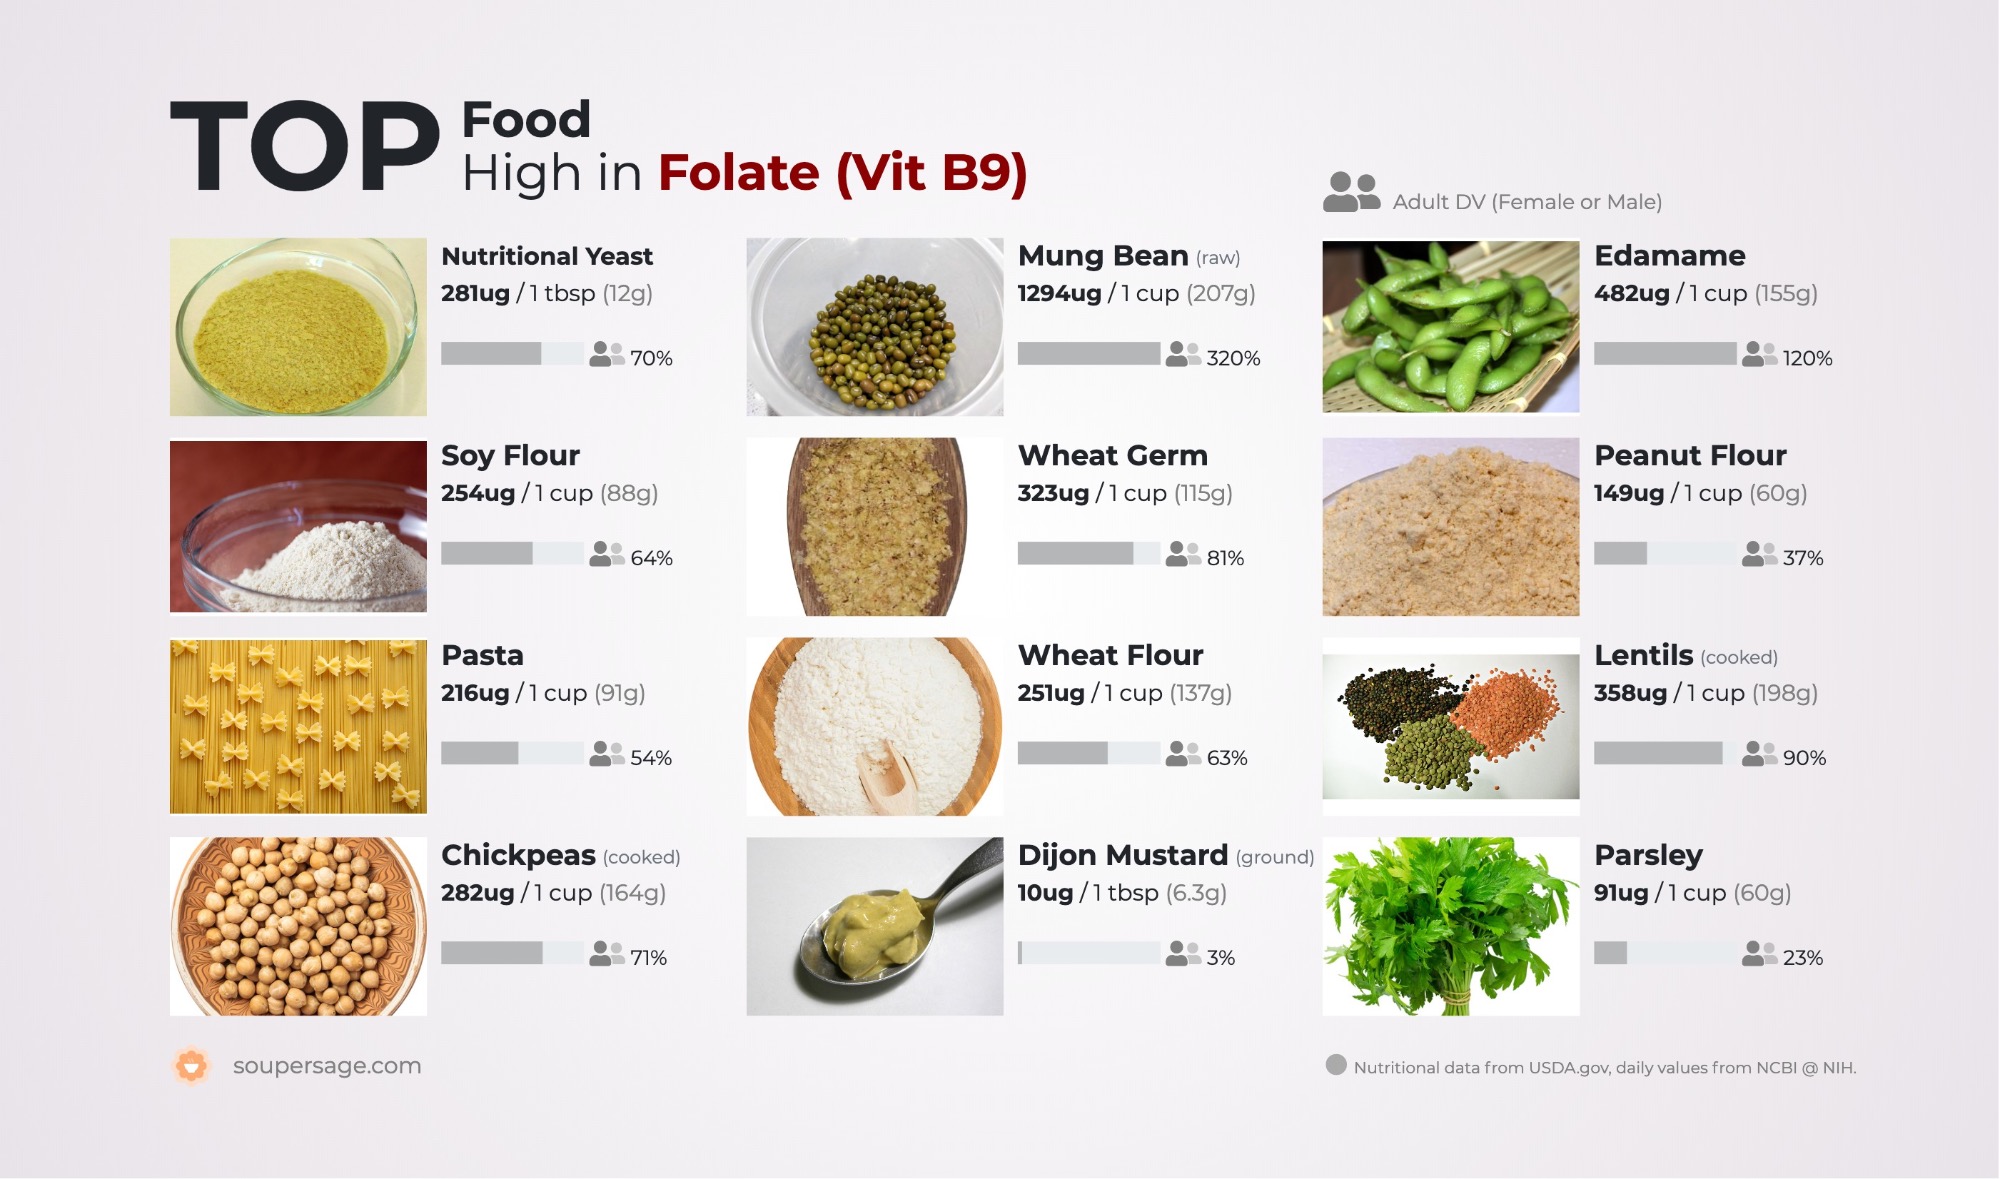 image of Top Food High in Folate (Vit B9)